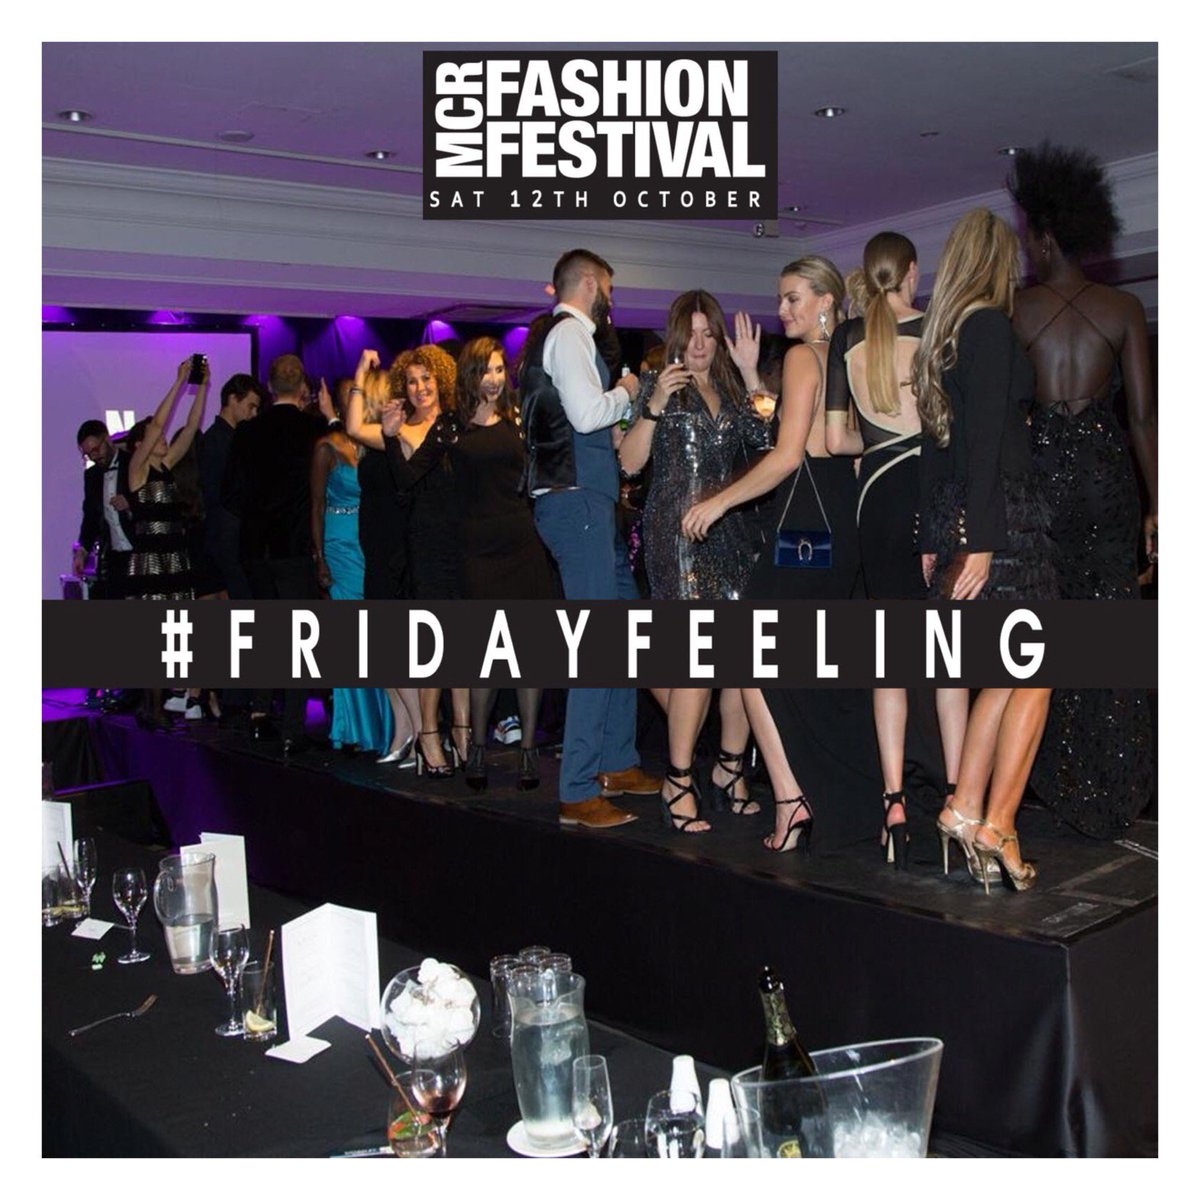 Who has that Friday Feeling already? 🙌🏻🍸🖤
...
#Friday #FridayFeeling #Social #fridayfashion #fashionfridays #currentmood #dance #fridaynight #party #entertainment #event #eventmanagement #eventmanchester #manchesterevent #mcr #mcrevent #event #dancing #manchester #mcrbrand